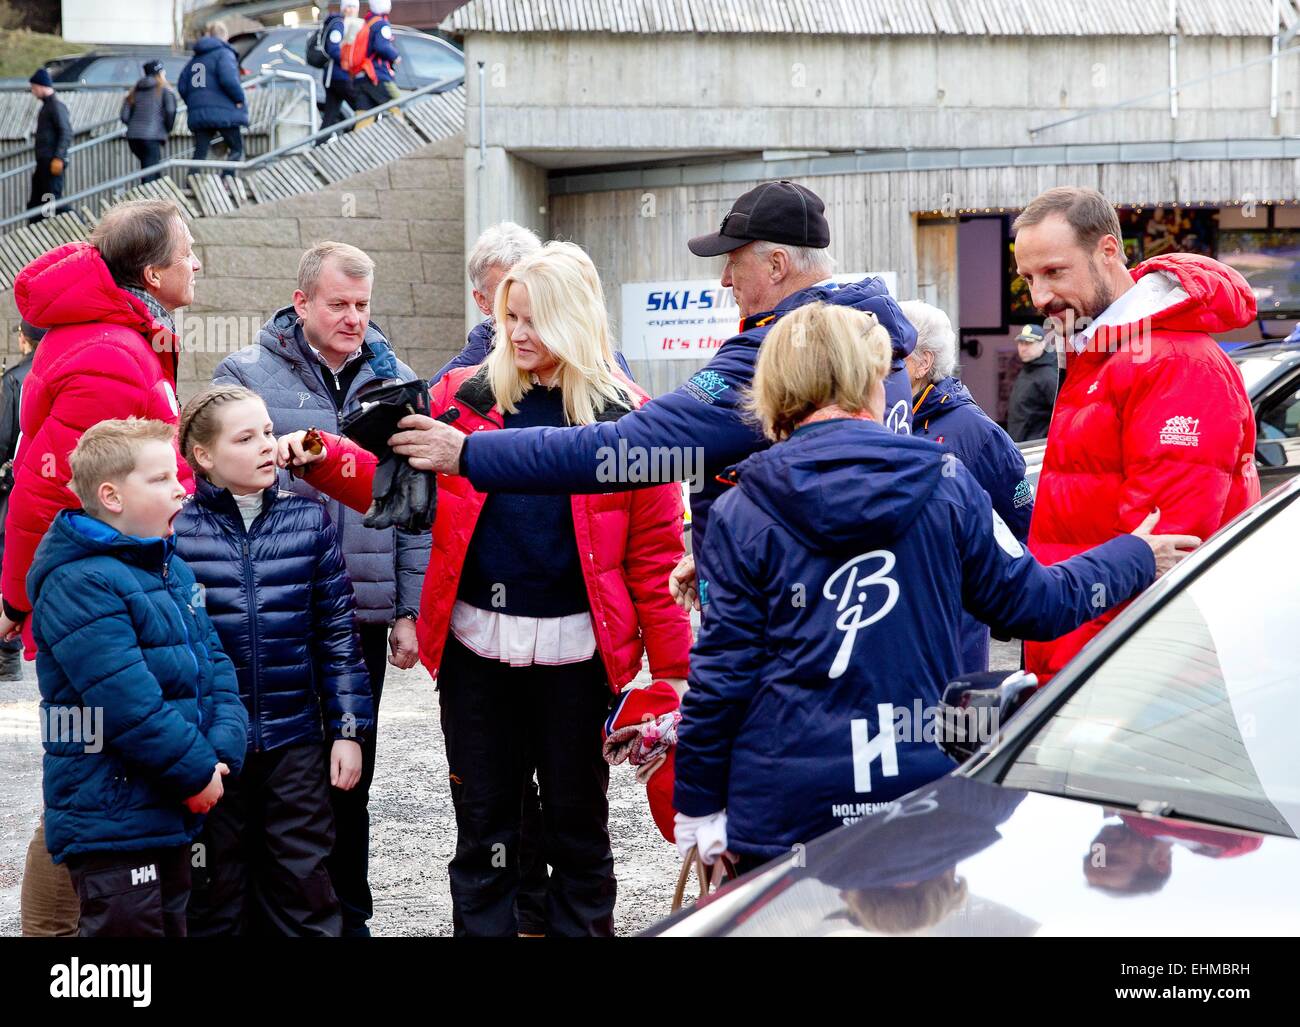 HM King Harald, HM Queen Sonja, HRH Crown Prince Haakon, HRH Crown Princess Mette-Marit, Princess Ingrid Alexandra, Prince Sverre Magnus and Princess Astrid attend the Holmenkollen FIS World Cup Nordic in Oslo, Norway, 15-03-2015. Photo: RPE/Albert Nieboer/Netherlands OUT - NO WIRE SERVICE - Stock Photo